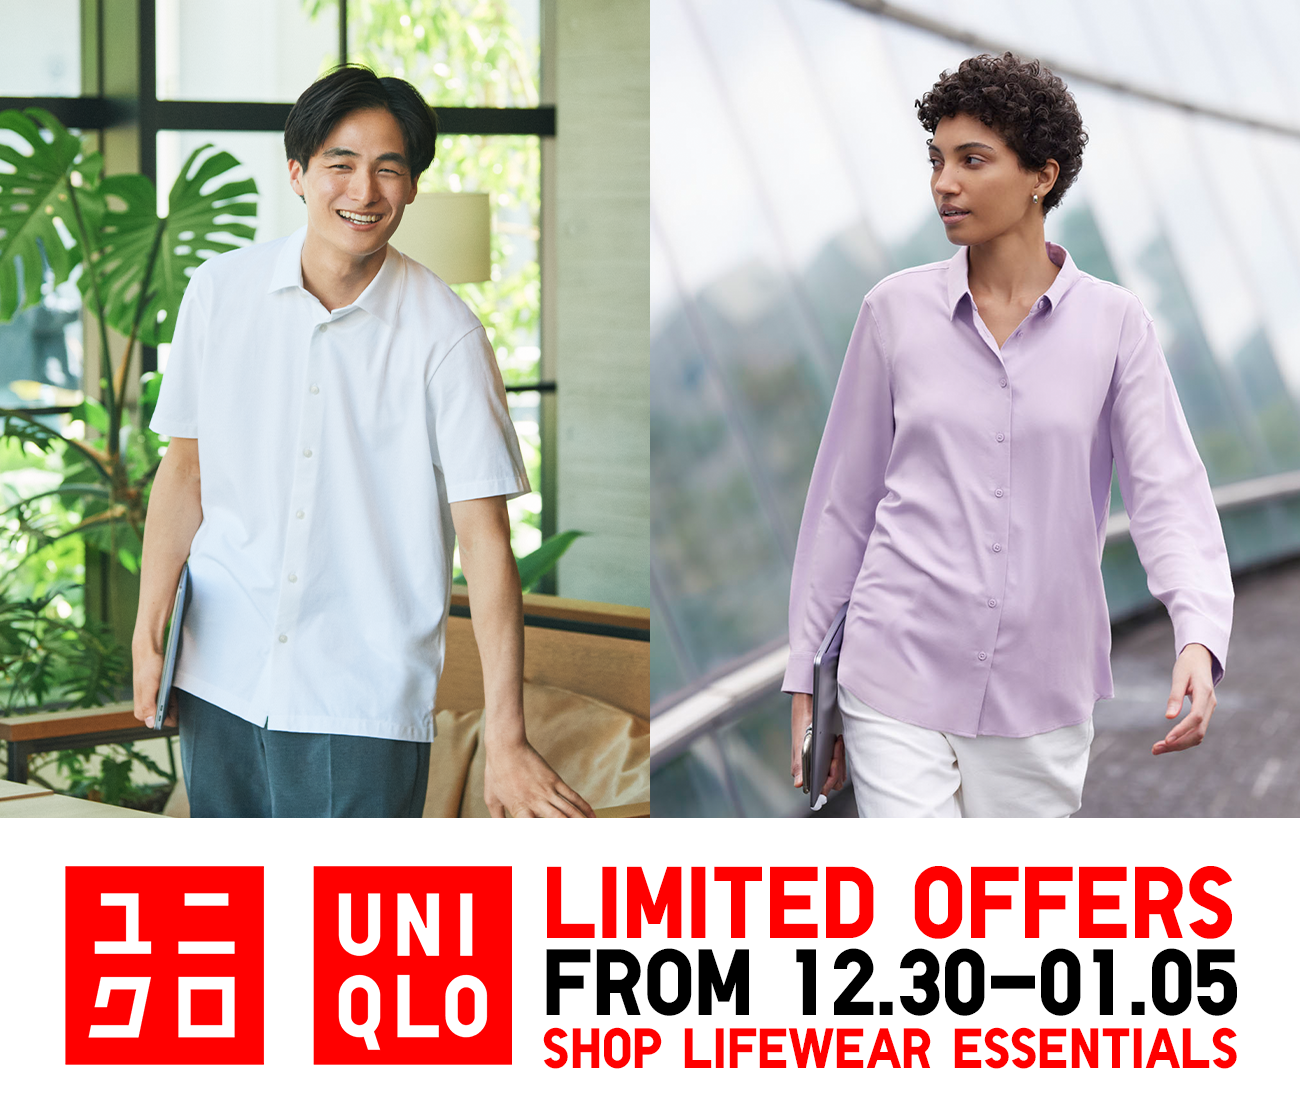 Hey, enjoy everyday comfort this new year with AIRism Innerwear - Uniqlo USA